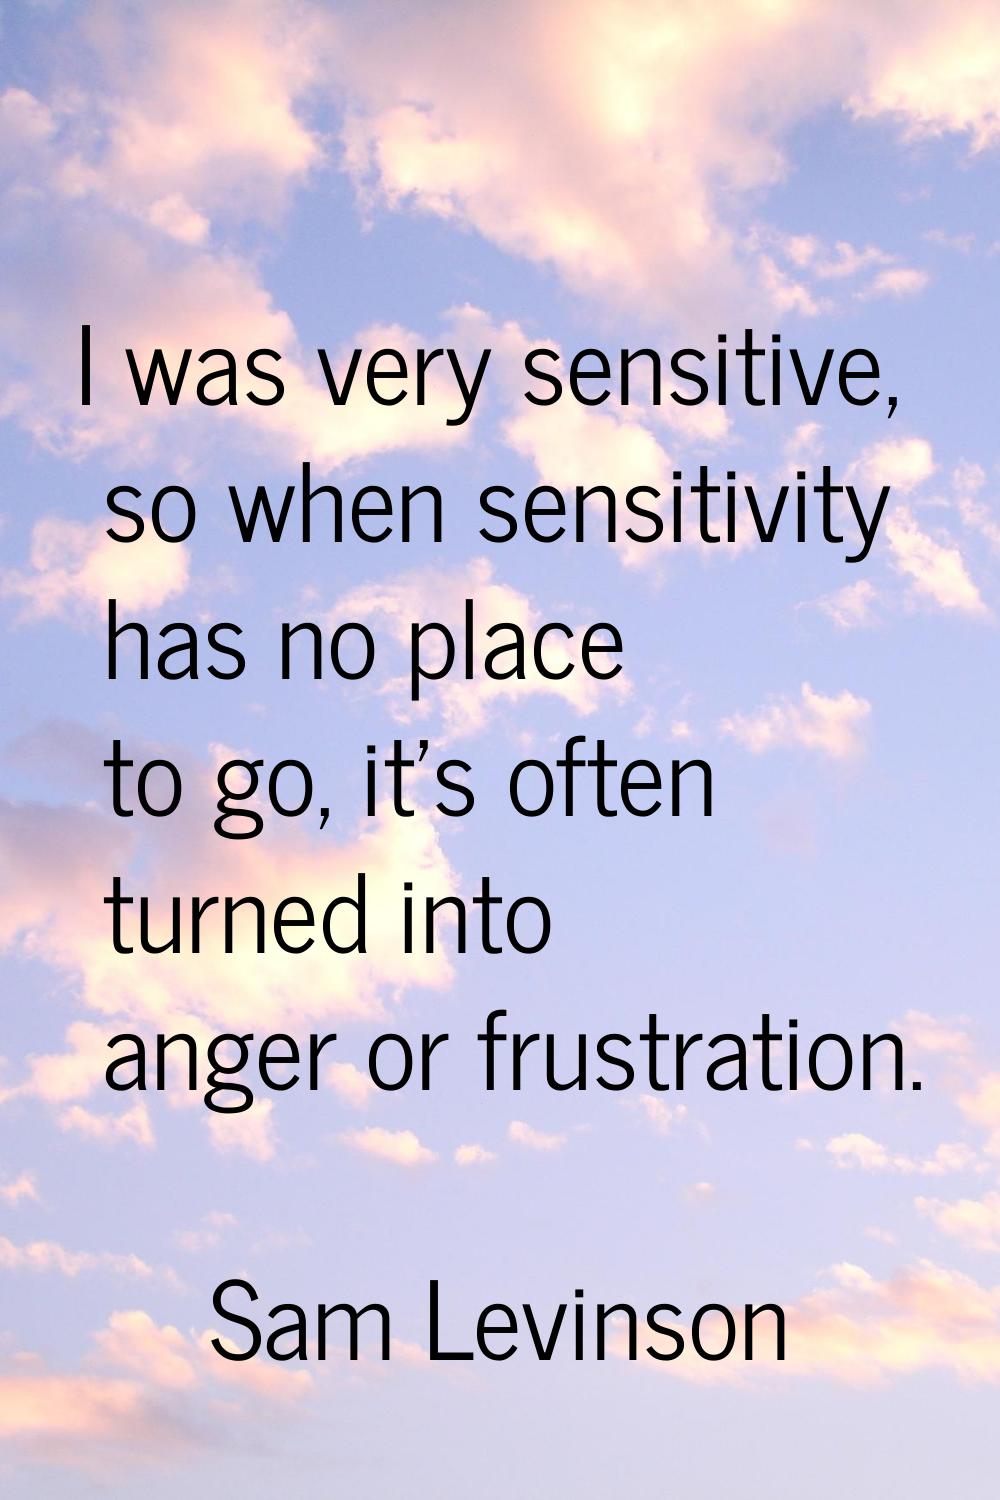 I was very sensitive, so when sensitivity has no place to go, it’s often turned into anger or frust